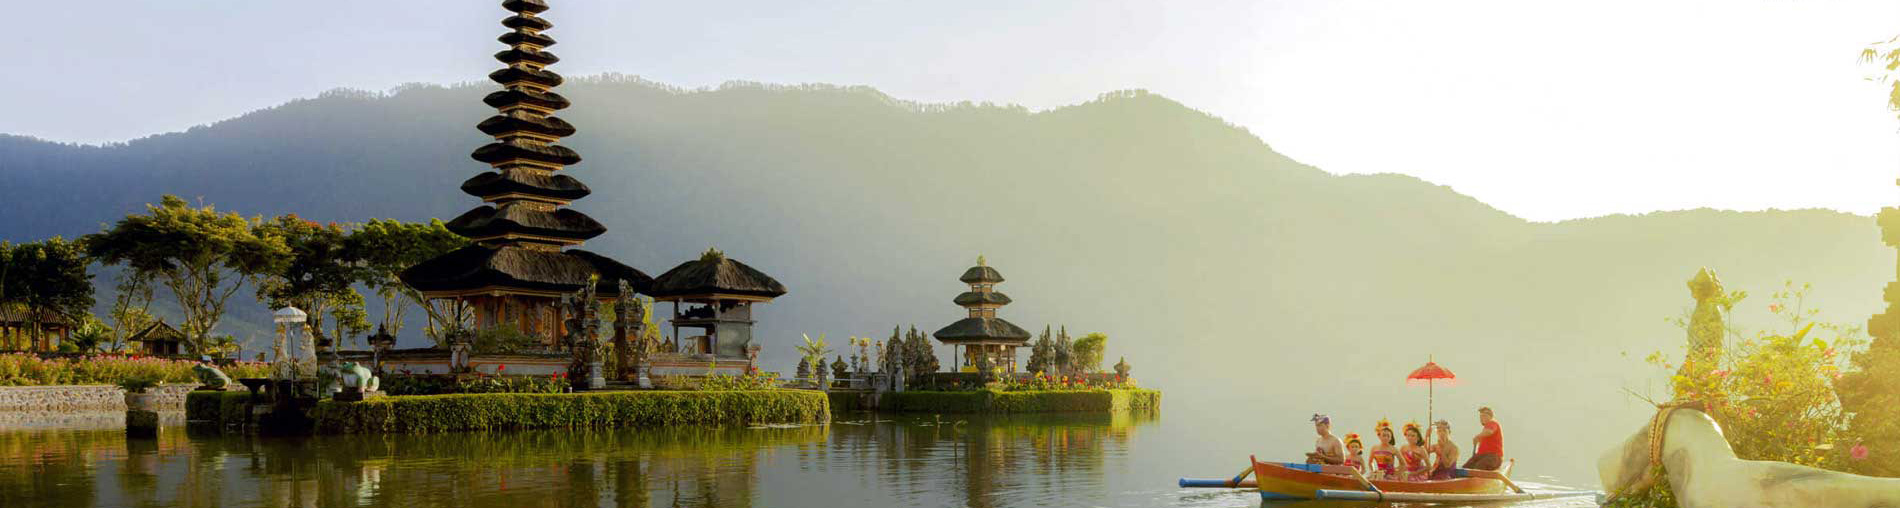 Most Popular Indonesia Tour Packages